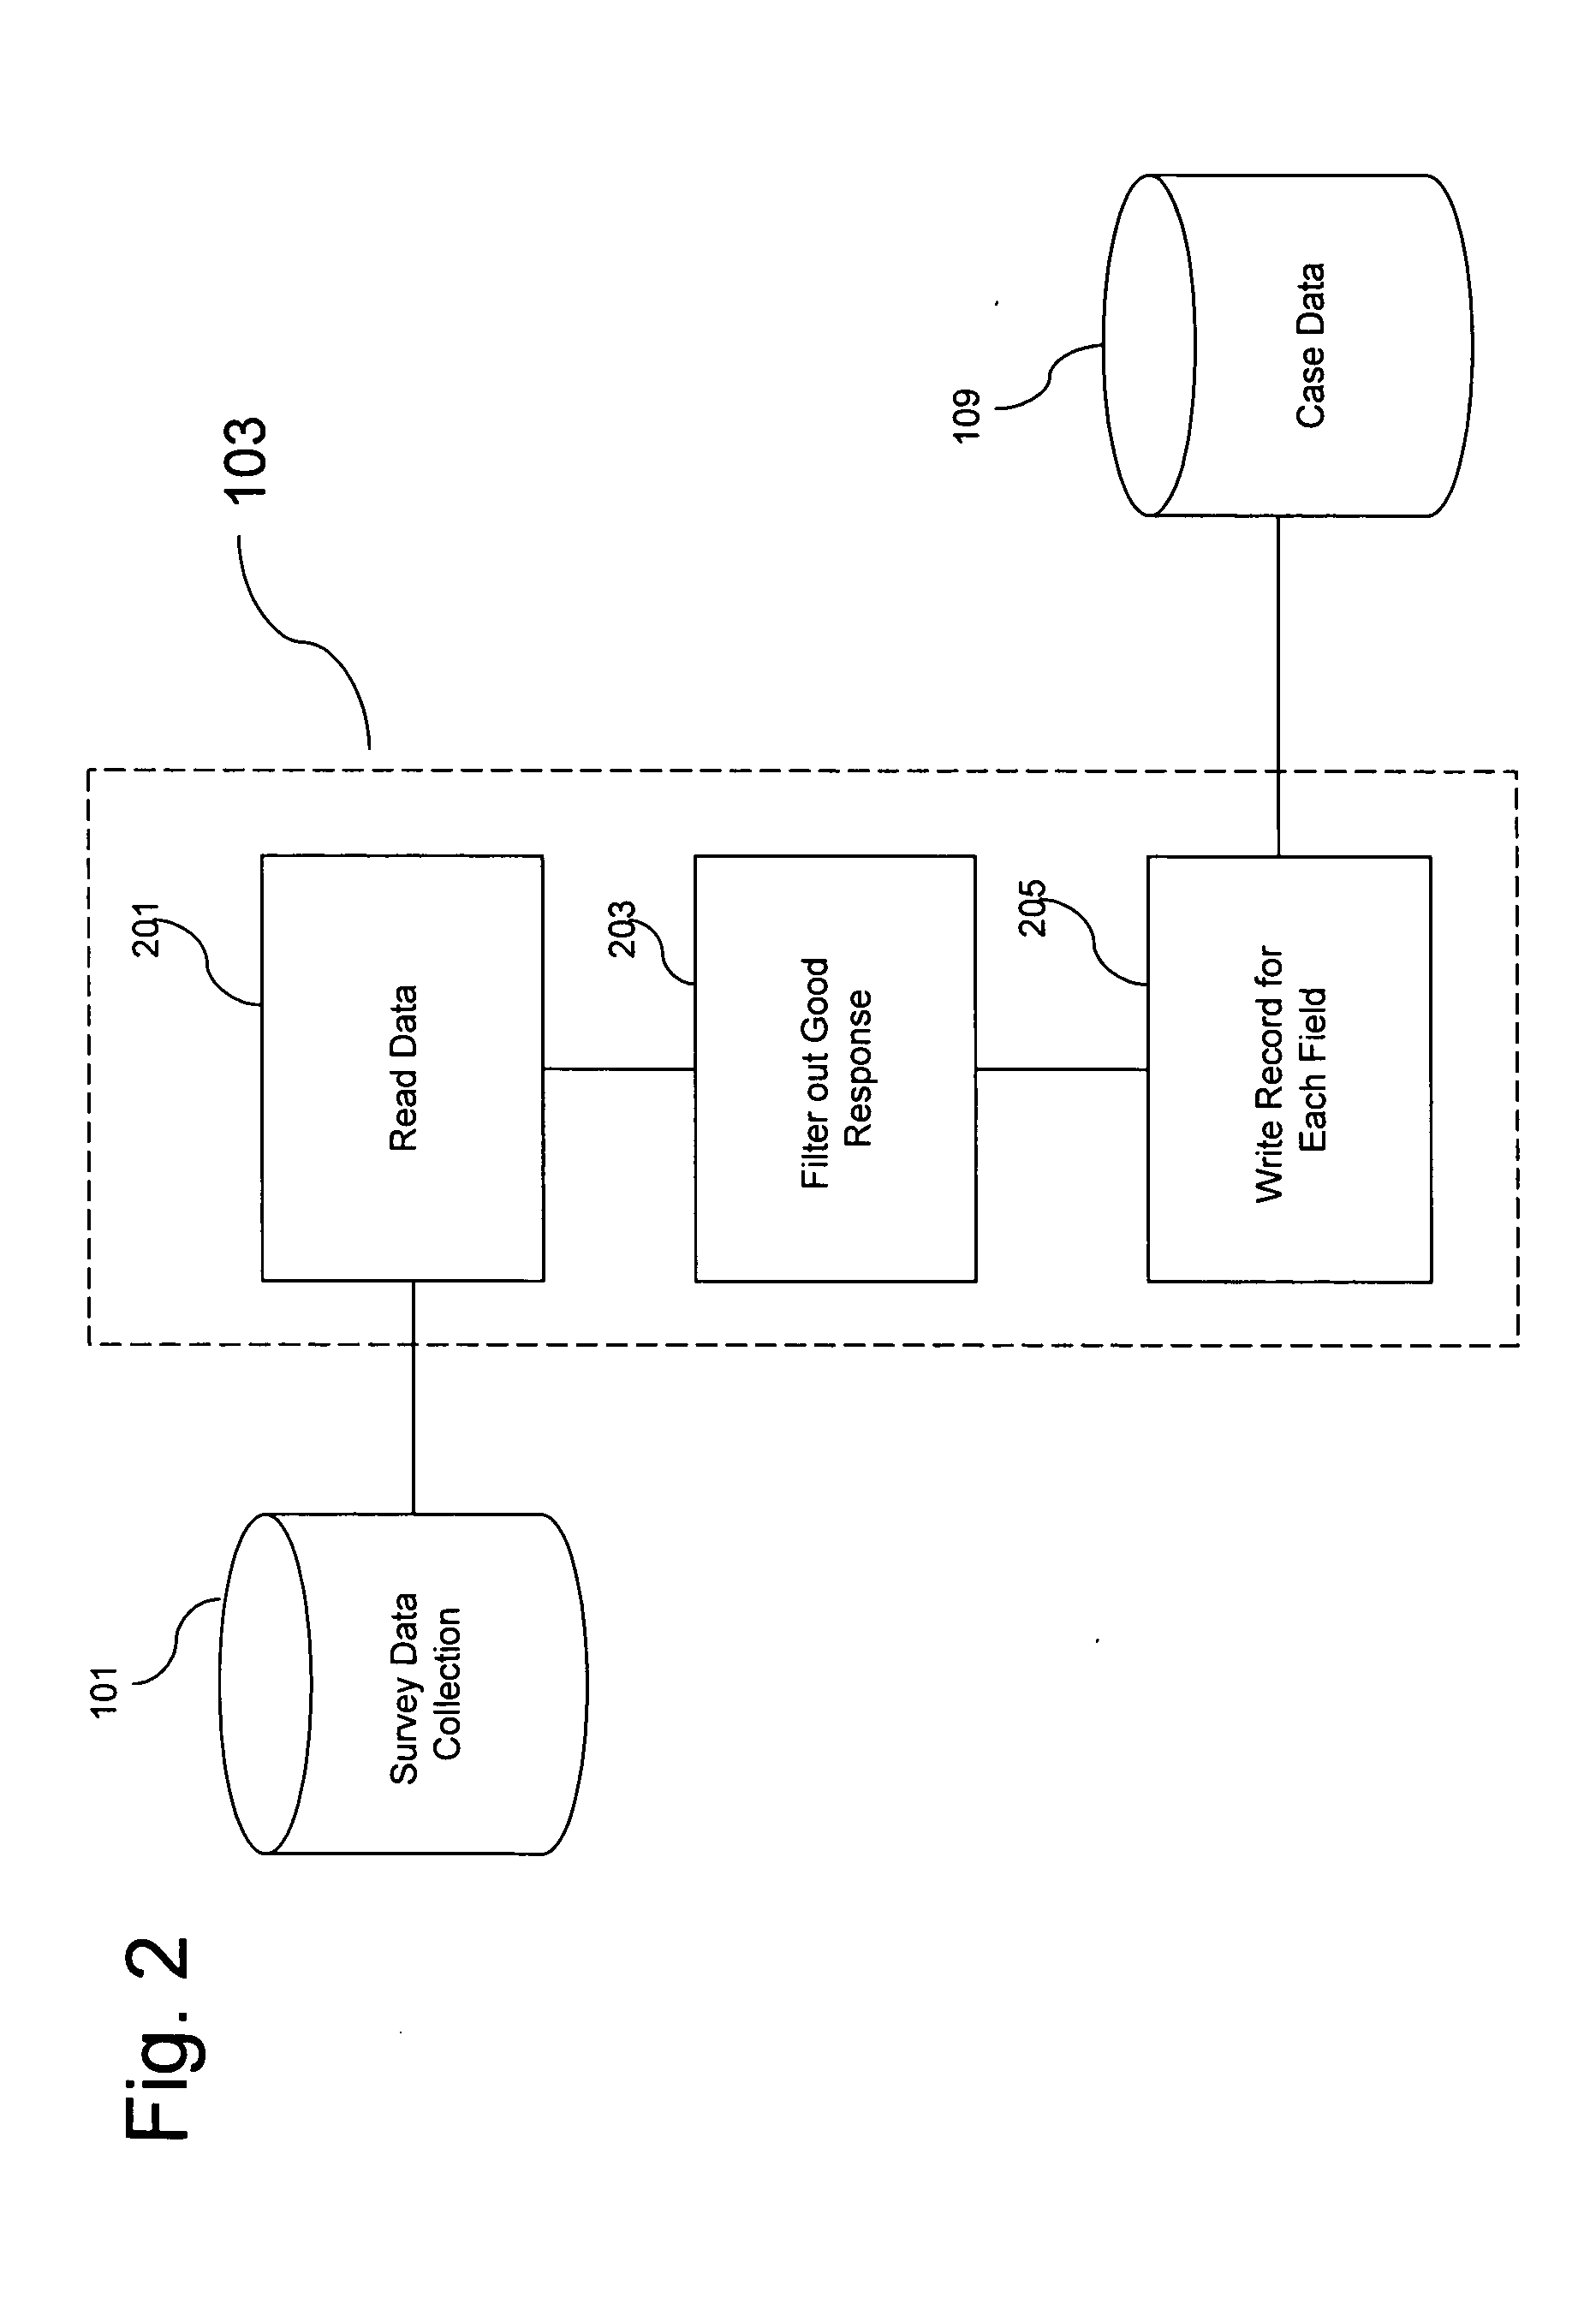 System and method for correlating market research data based on sales representative activity